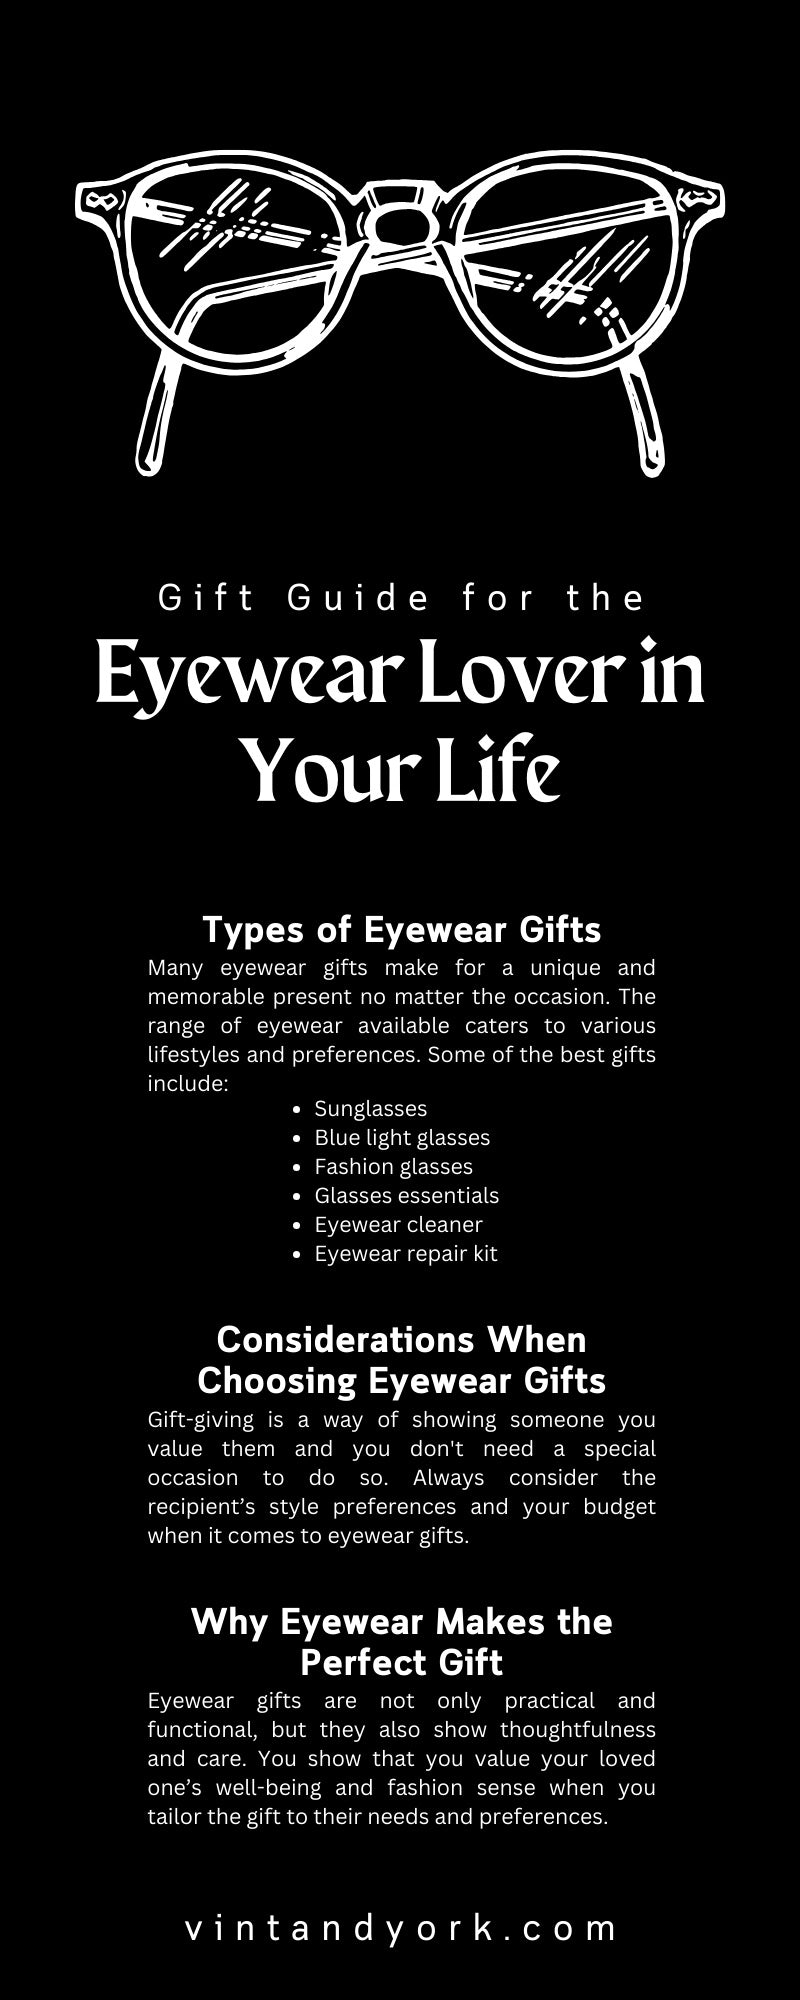 Gift Guide for the Eyewear Lover in Your Life